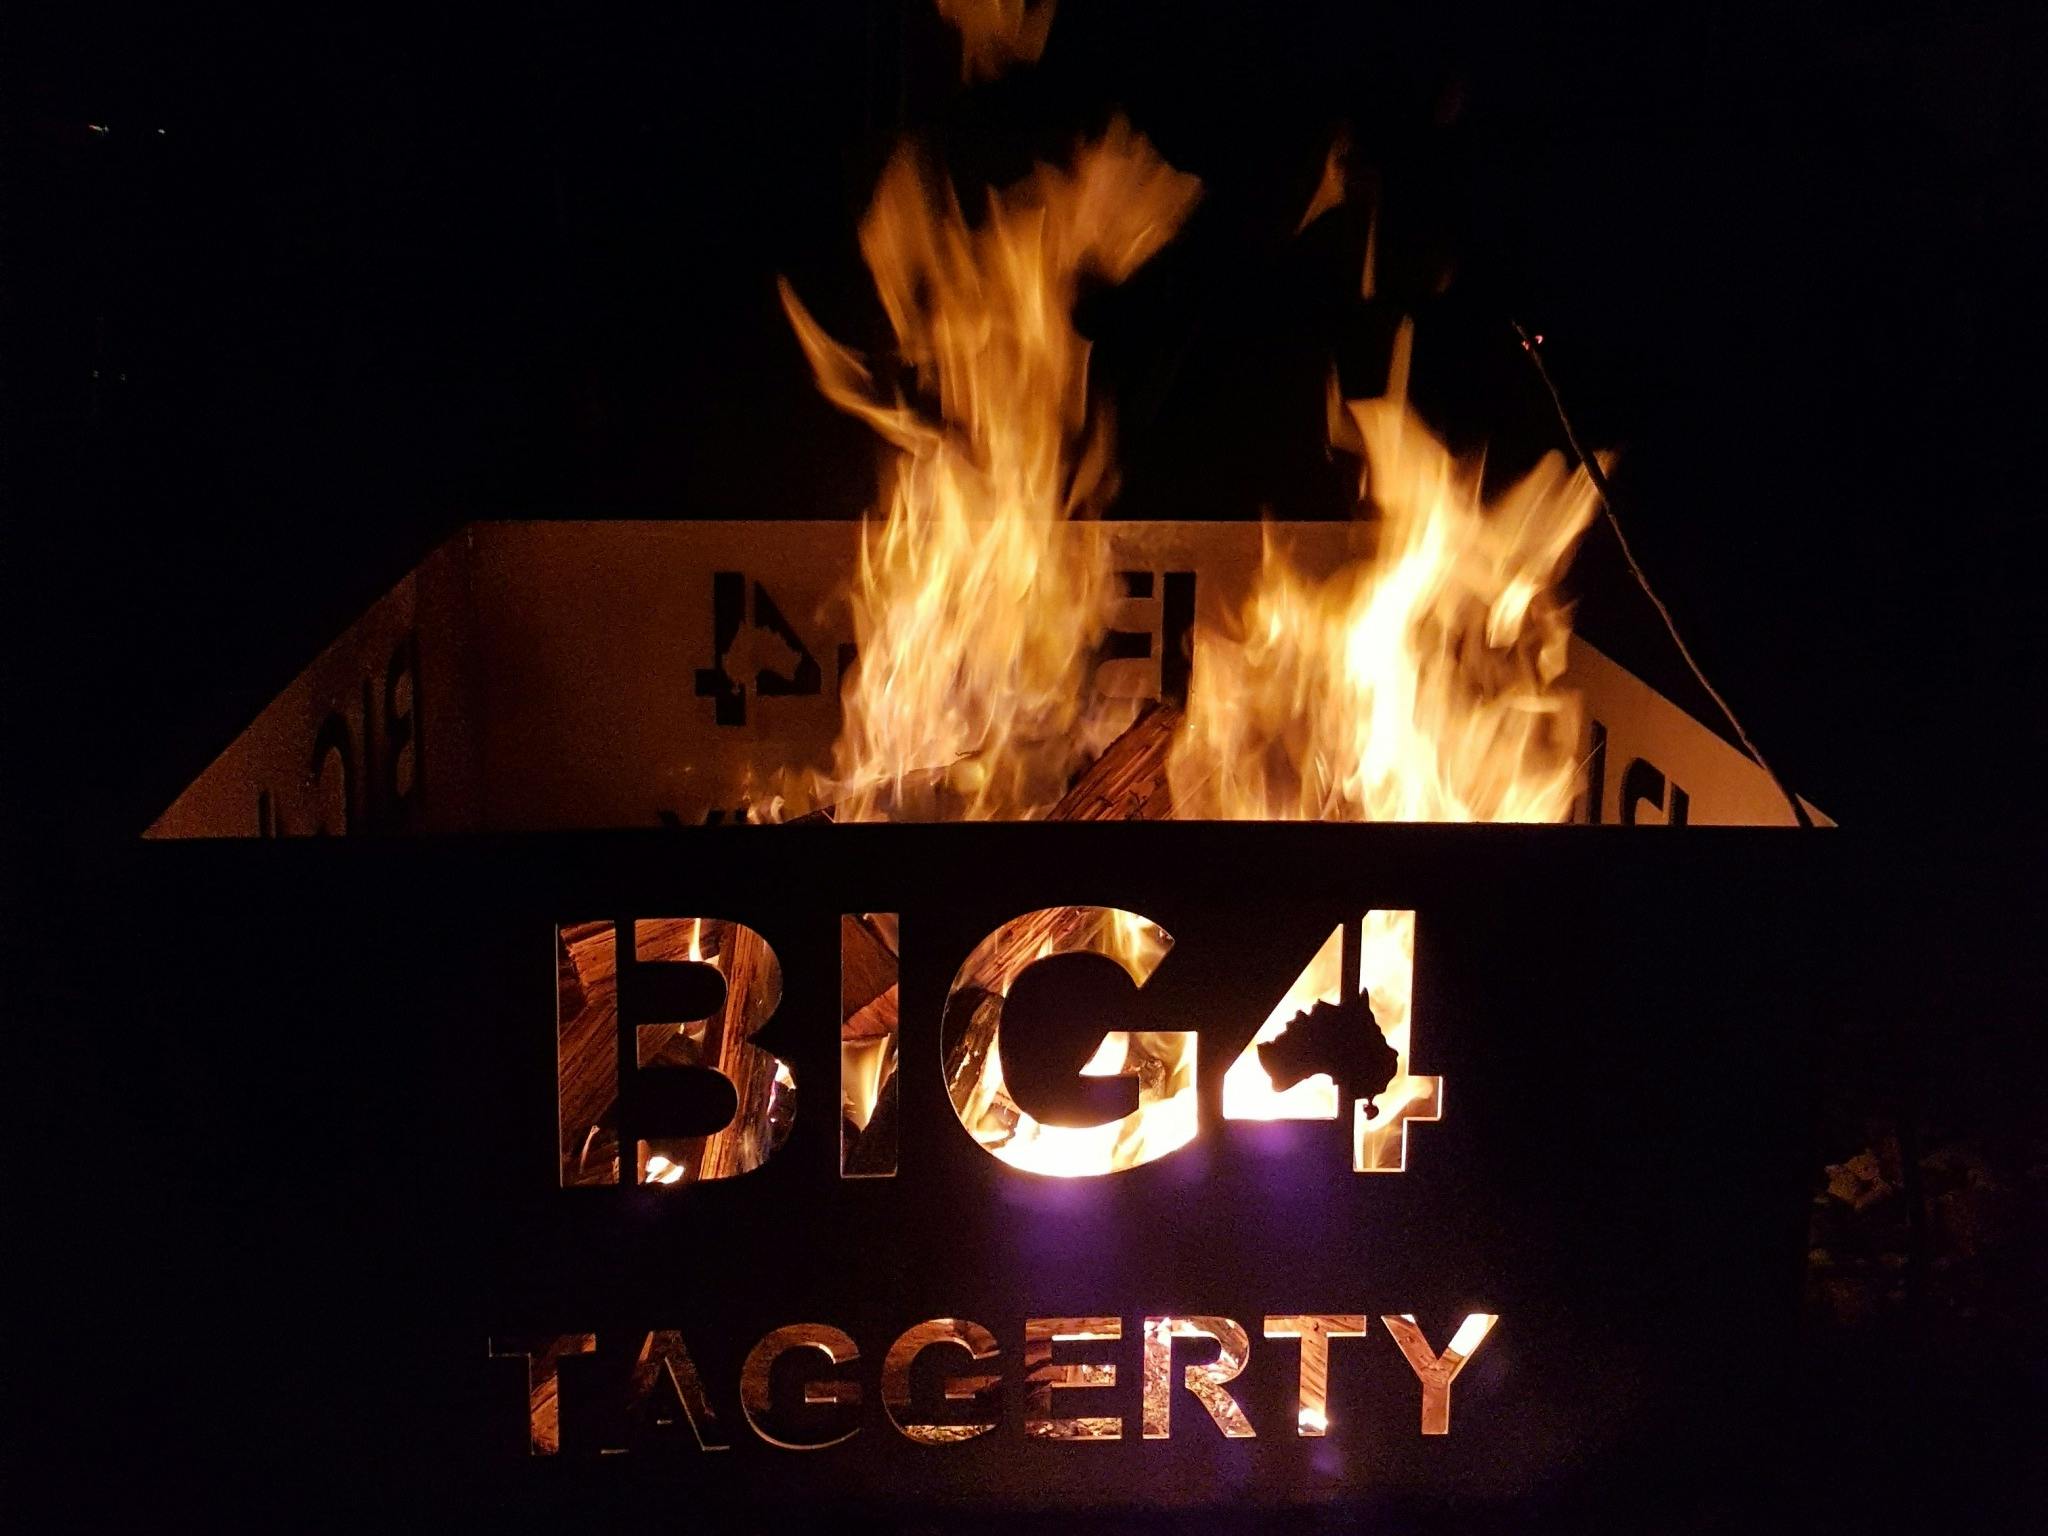 BIG4 Taggerty Fire Drum